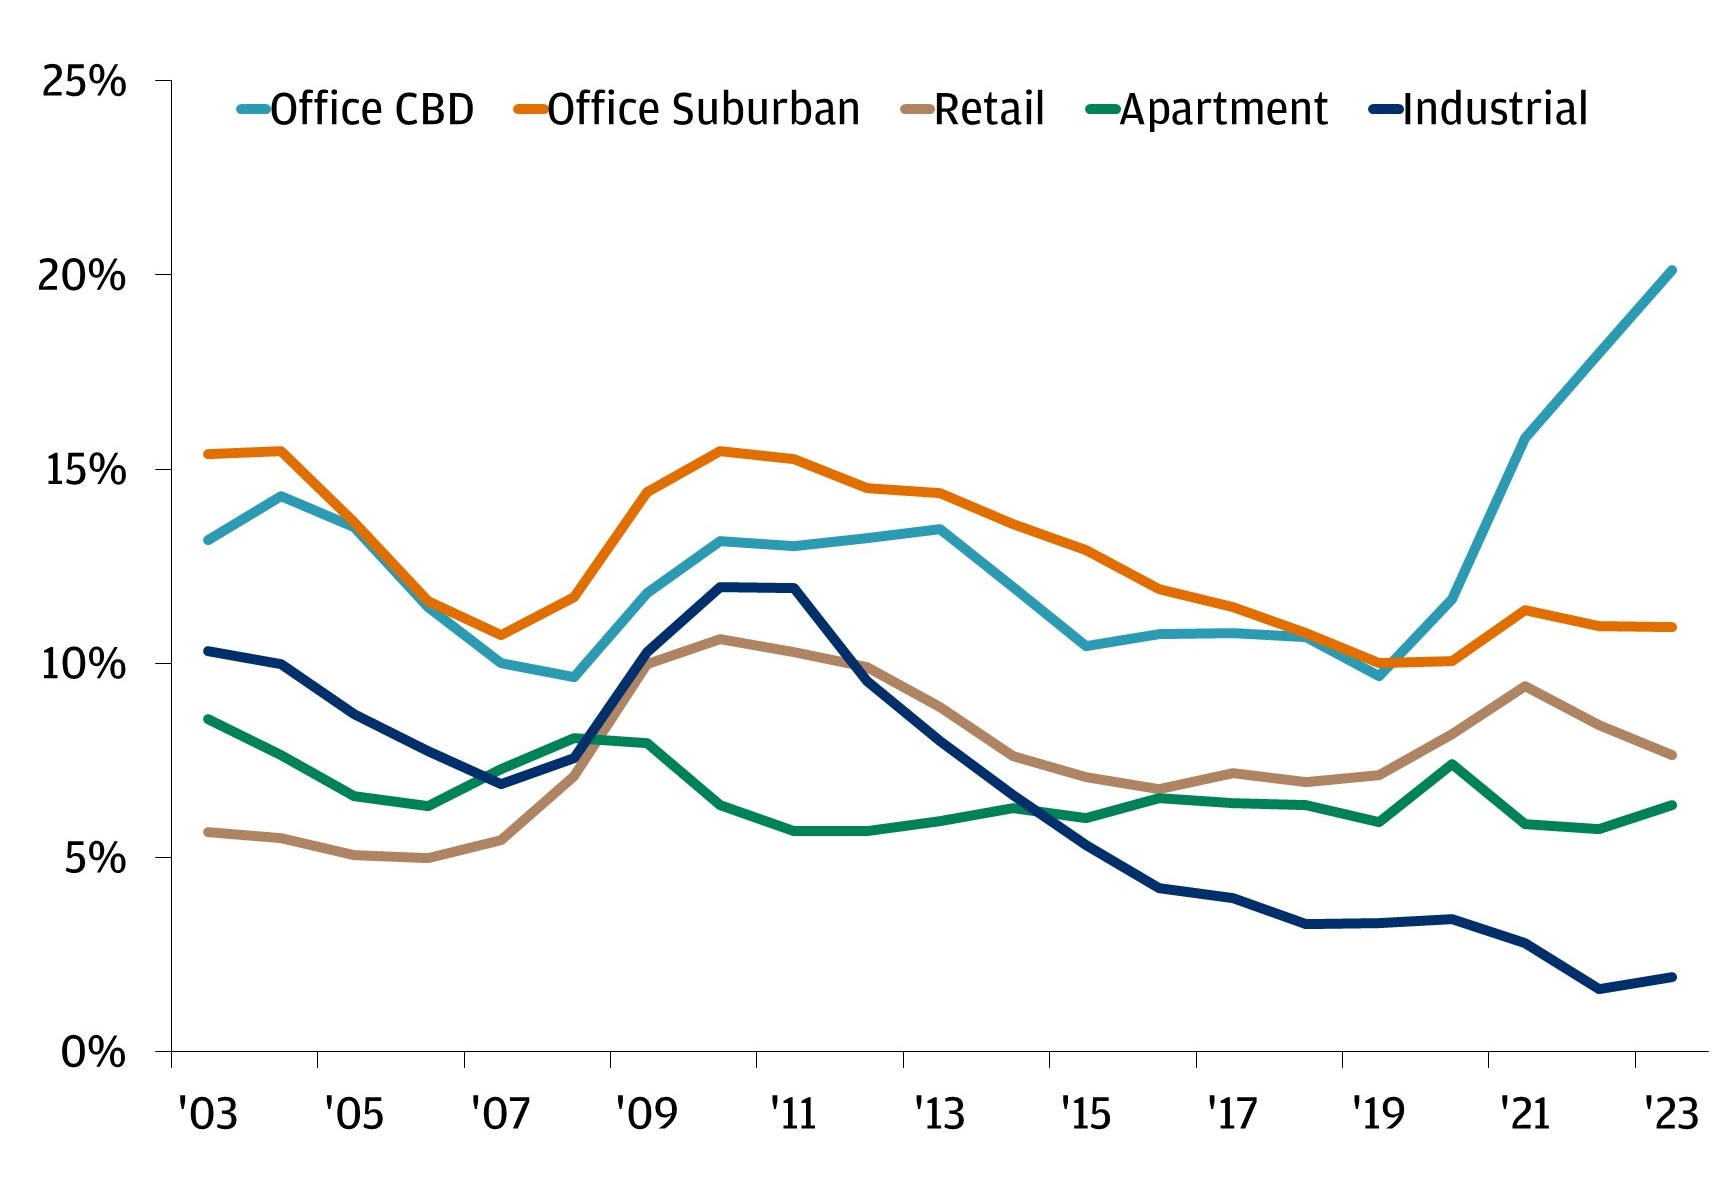 The chart shows the CRE vacancy rates by subsector from 2003 to 2023.